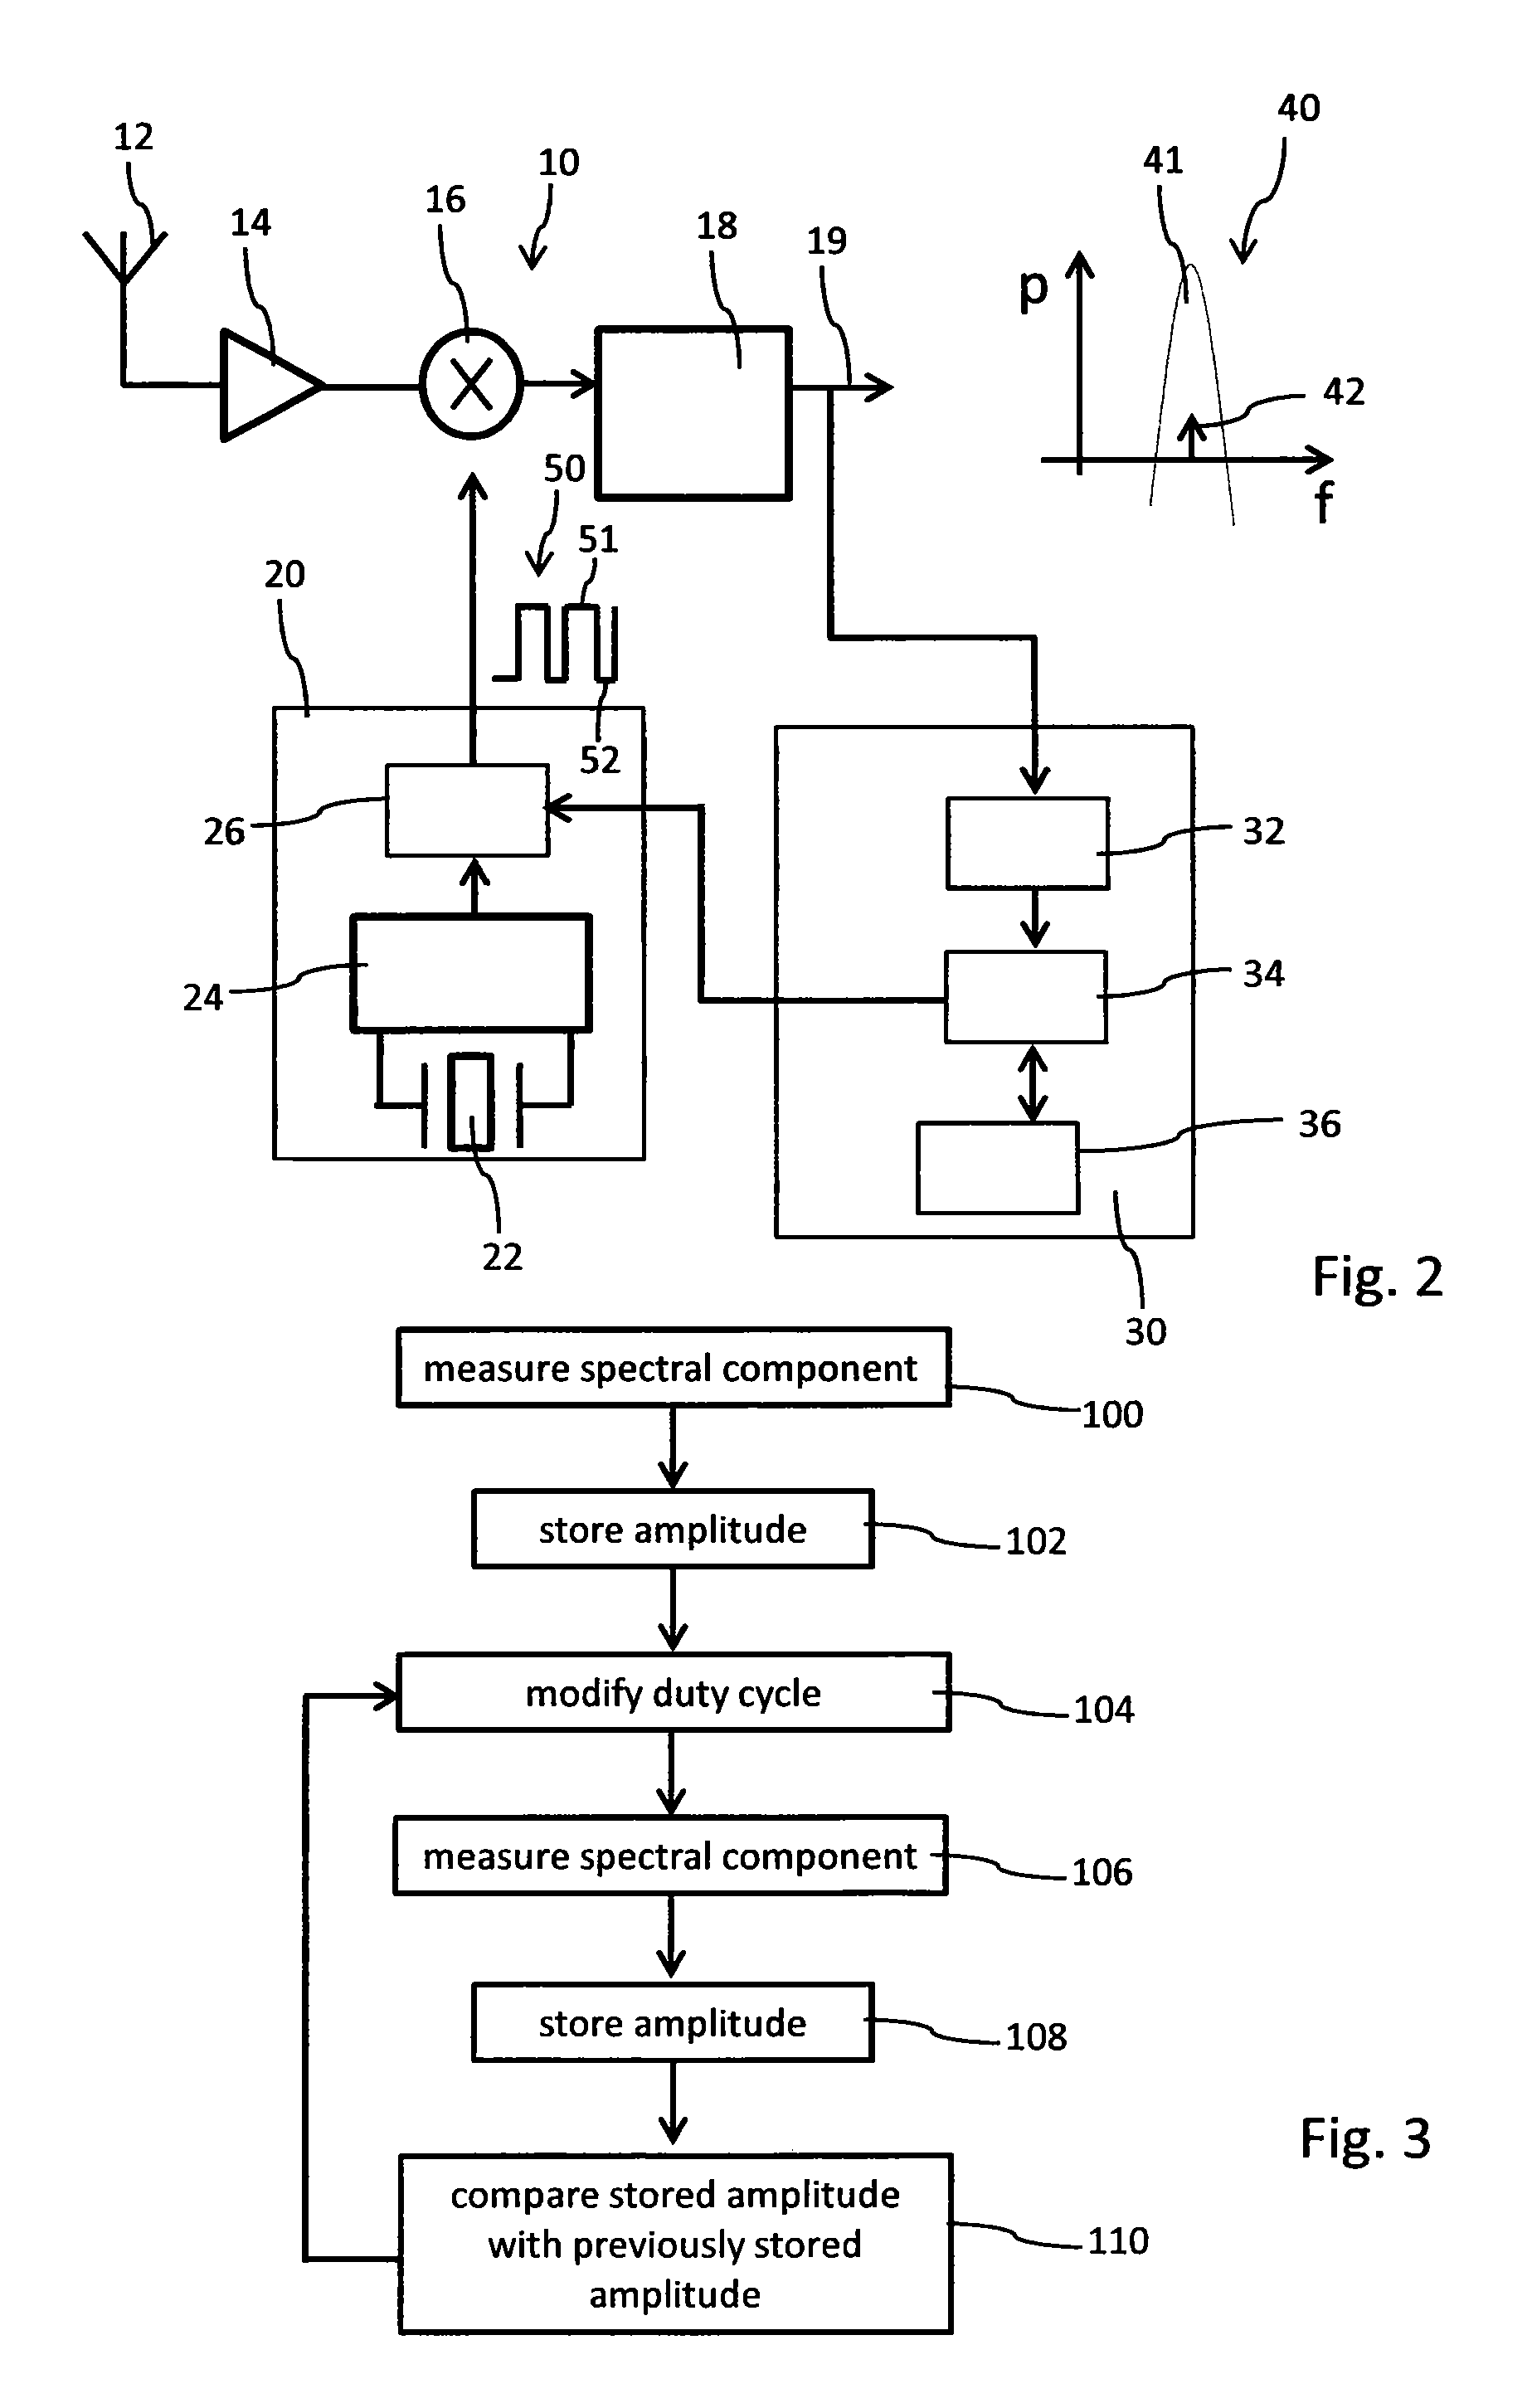 Signal receiver with a duty-cycle controller